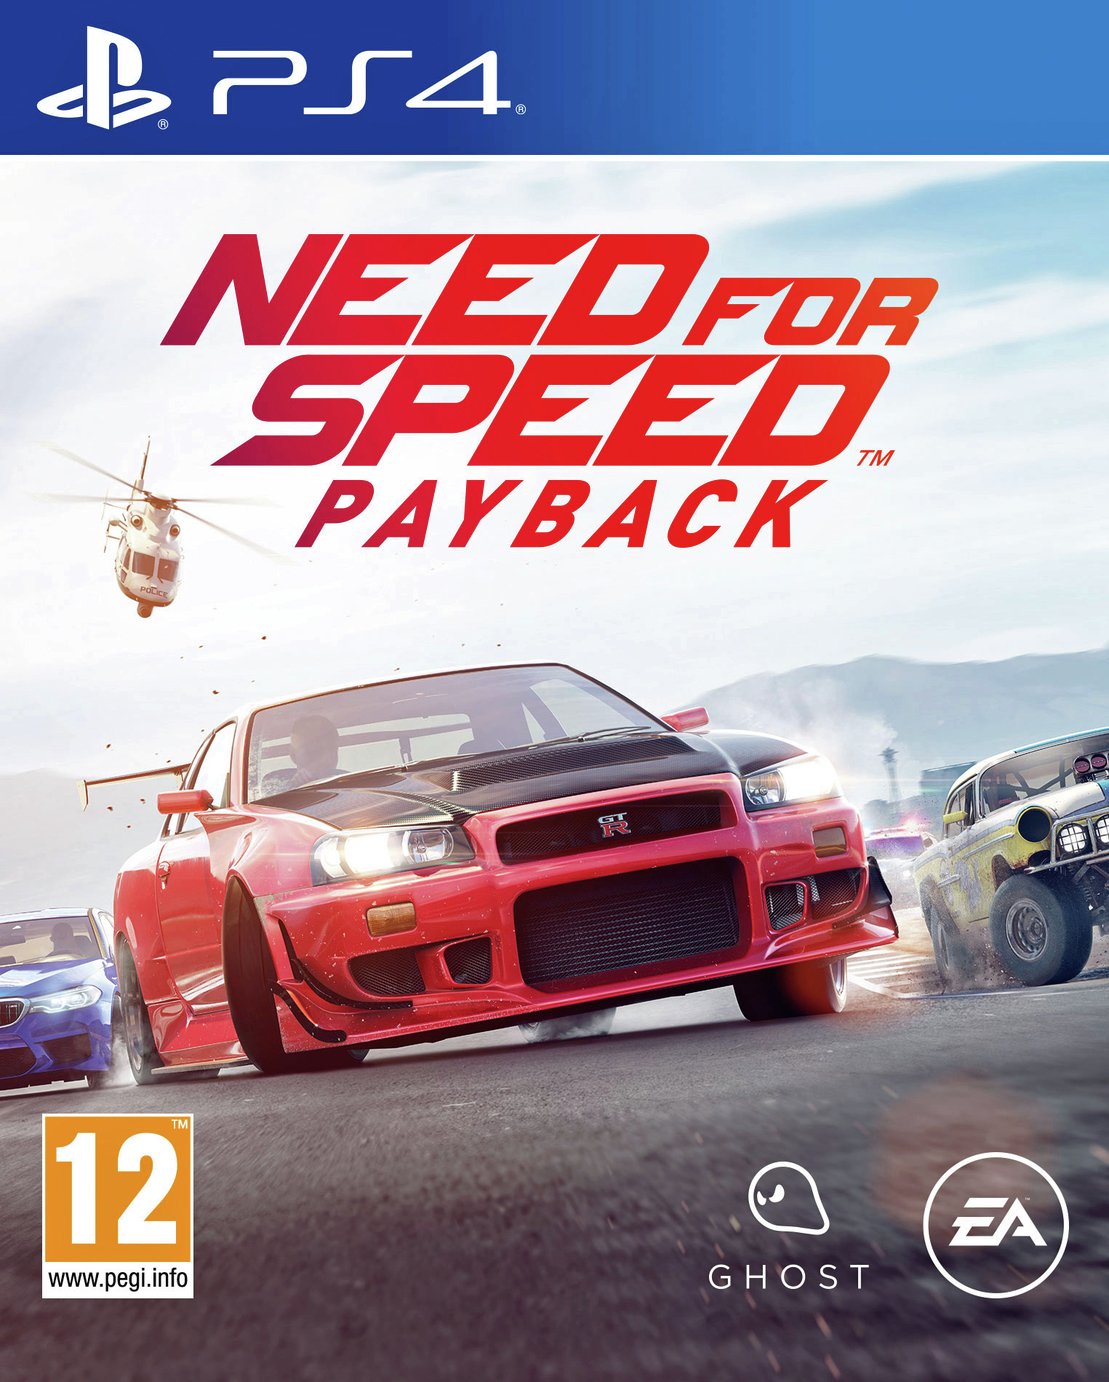 Need for Speed: Payback PS4 Game review